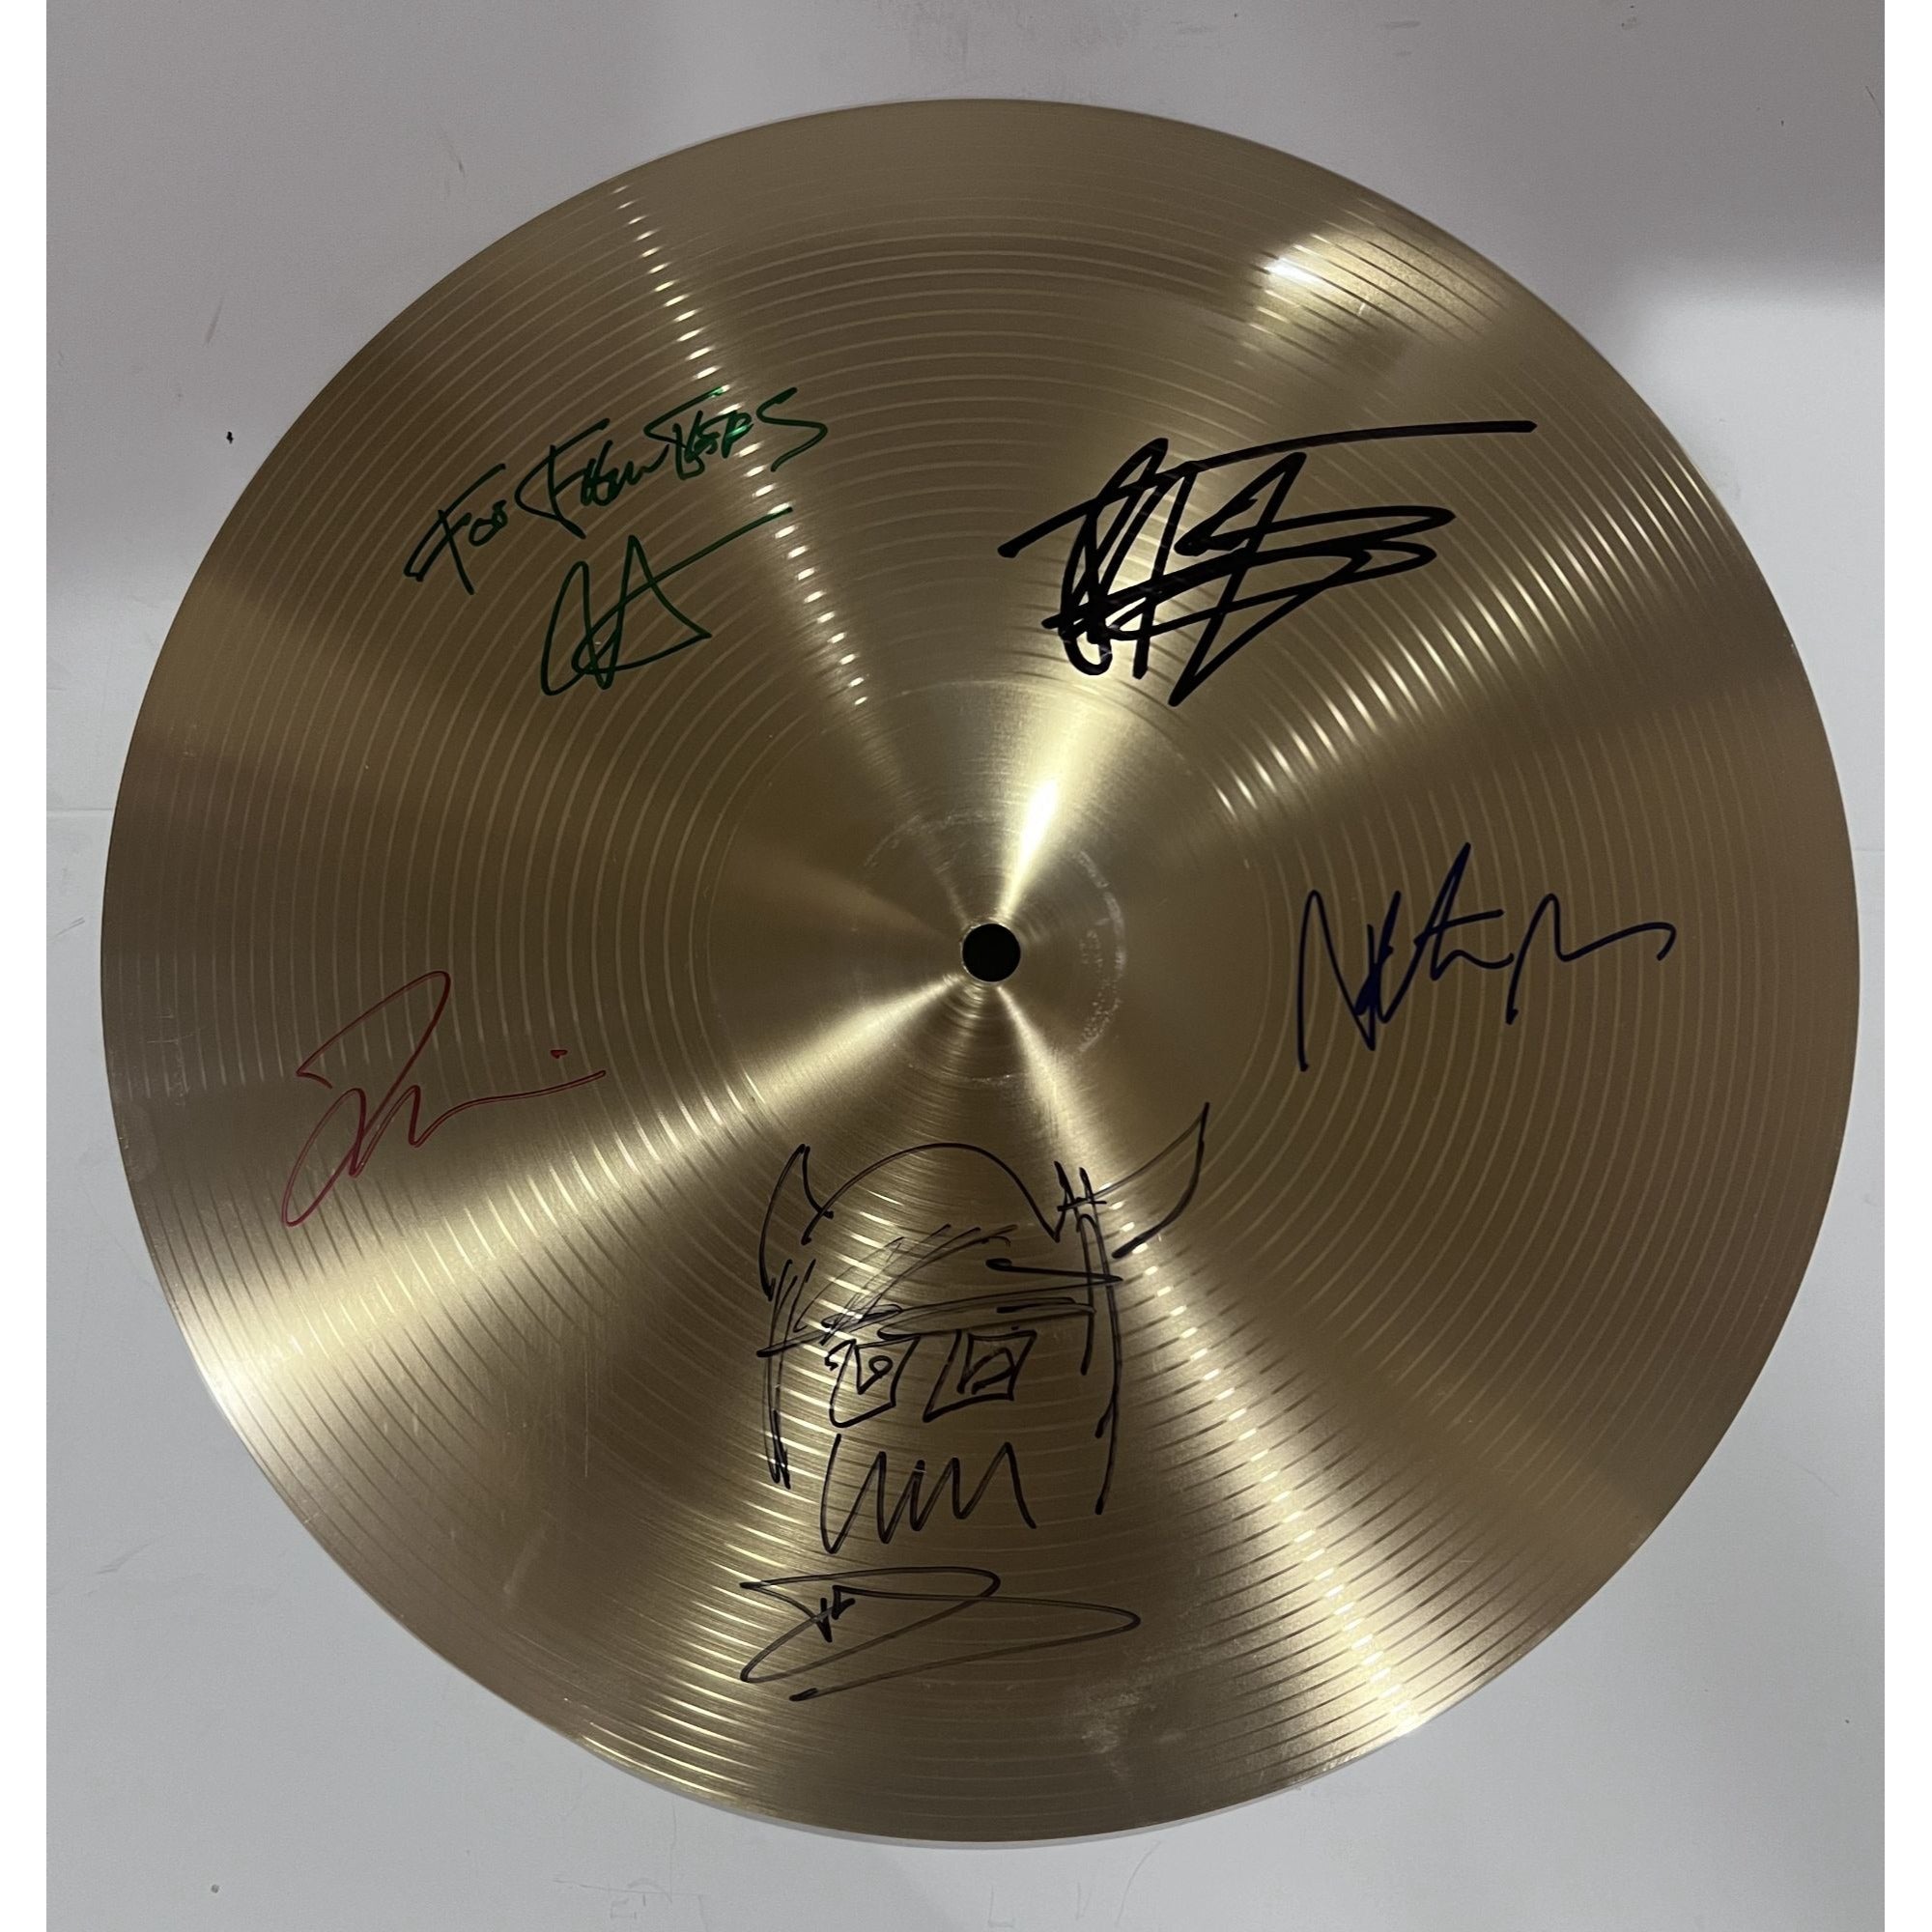 David grohl Taylor Hawkins the Foo Fighters Cymbal signed with proof